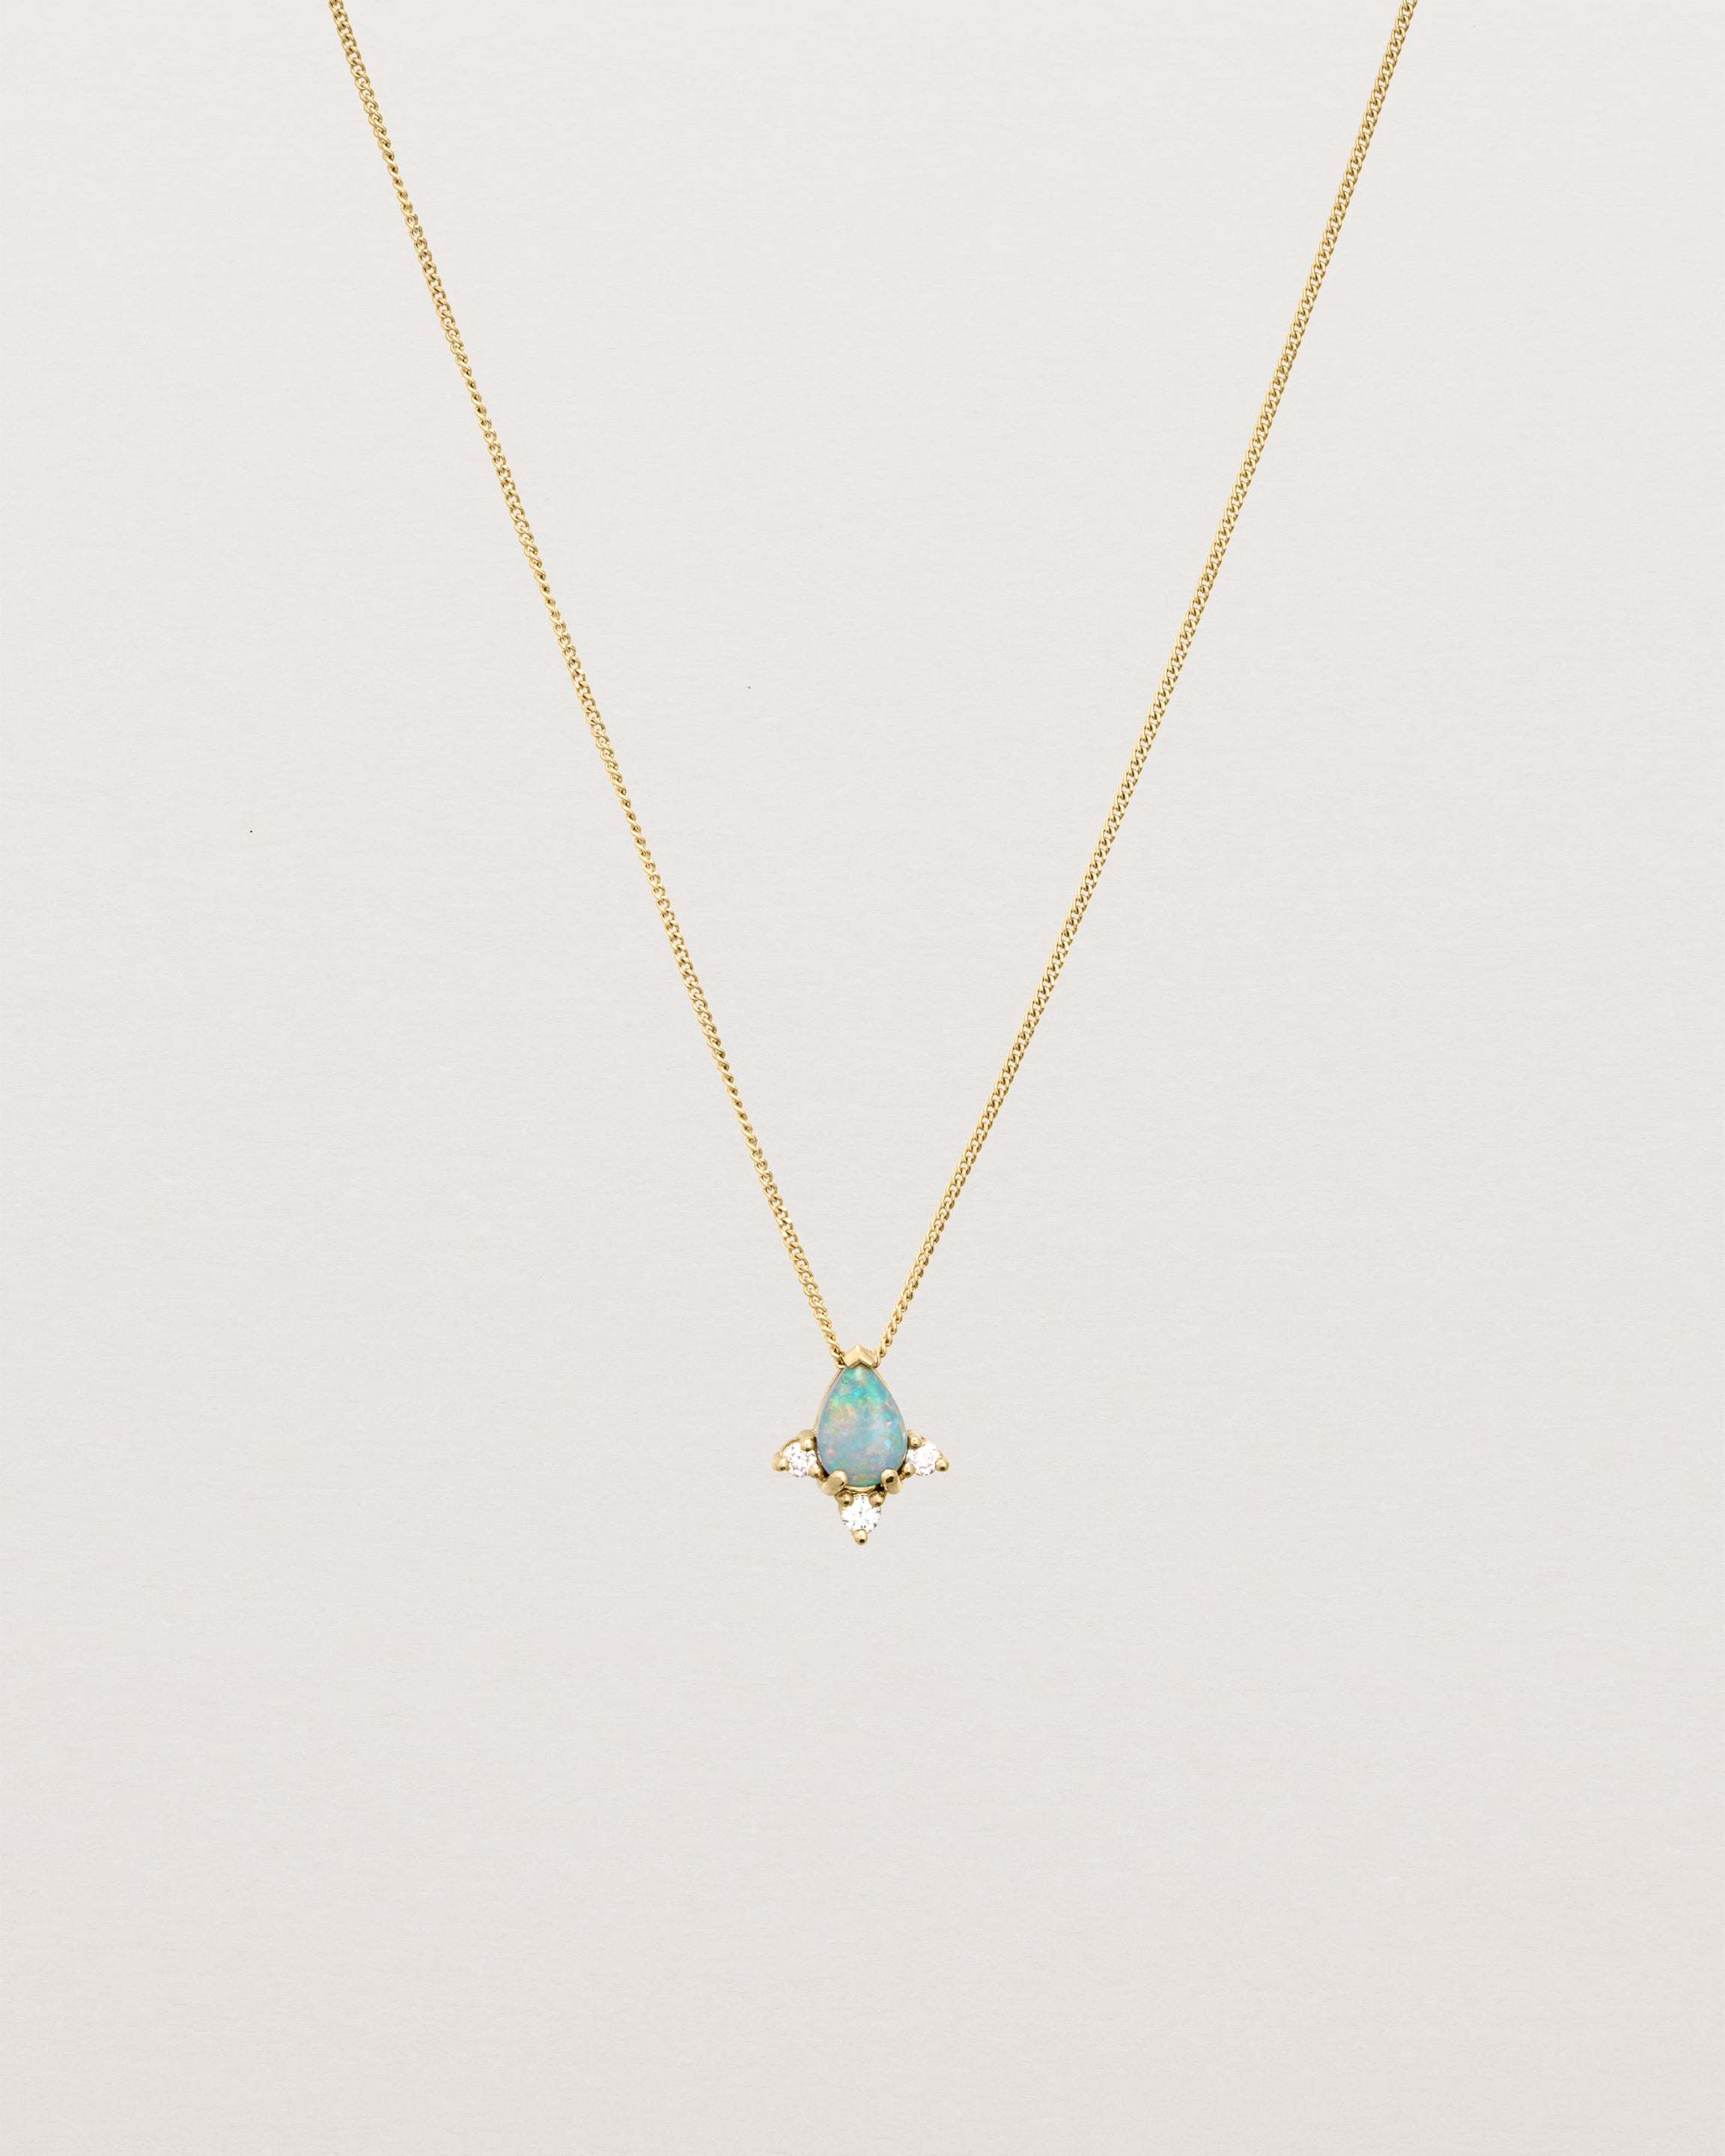 A yellow gold necklace featuring a blue opal stone with three small diamonds